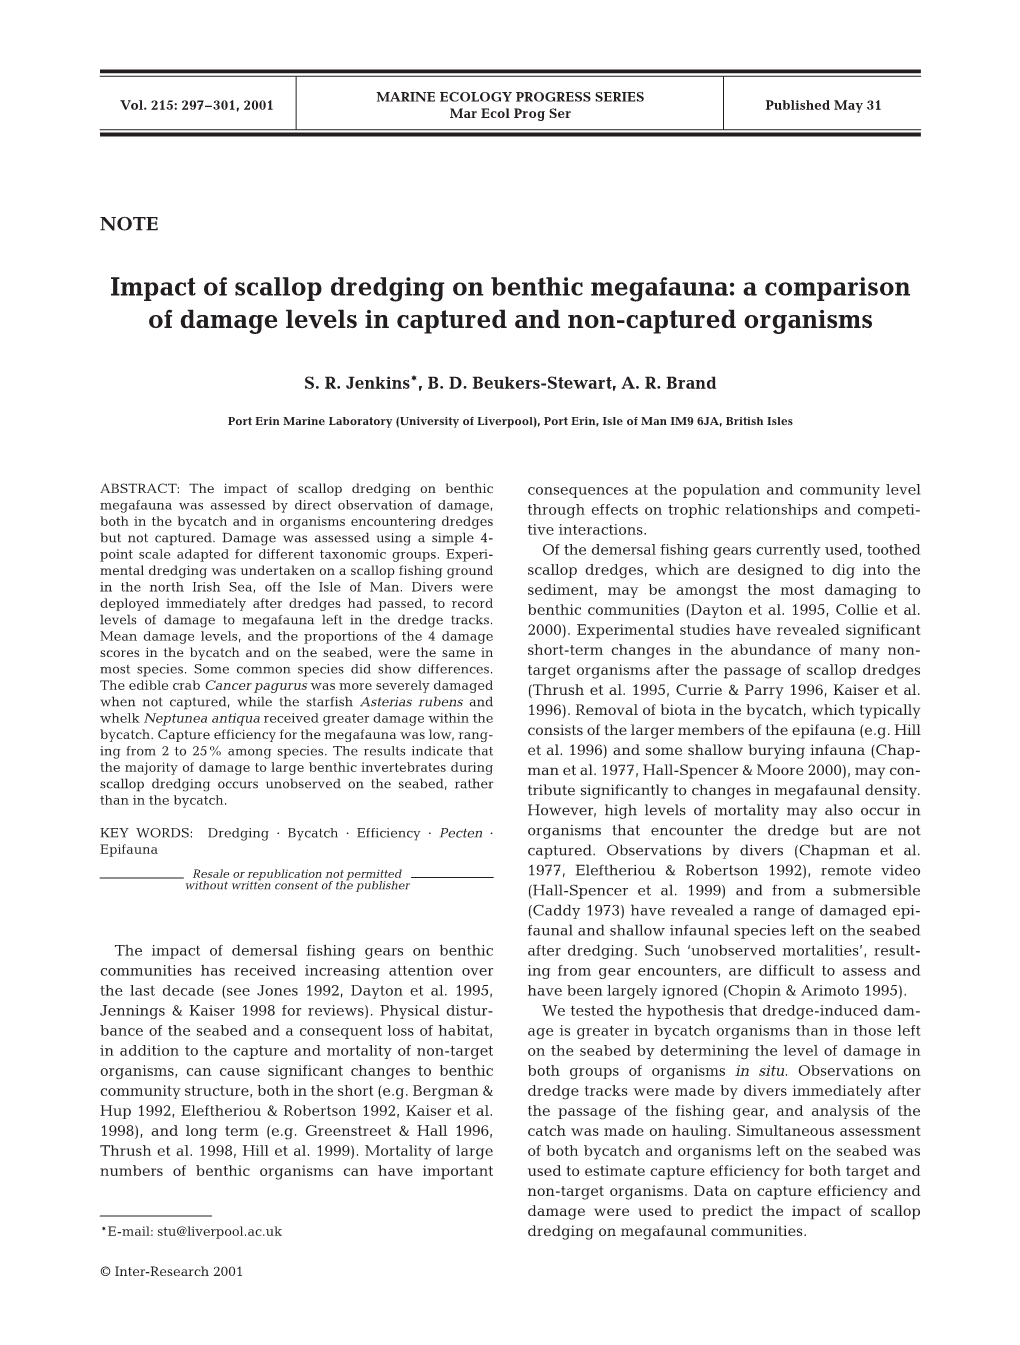 Impact of Scallop Dredging on Benthic Megafauna: a Comparison of Damage Levels in Captured and Non-Captured Organisms